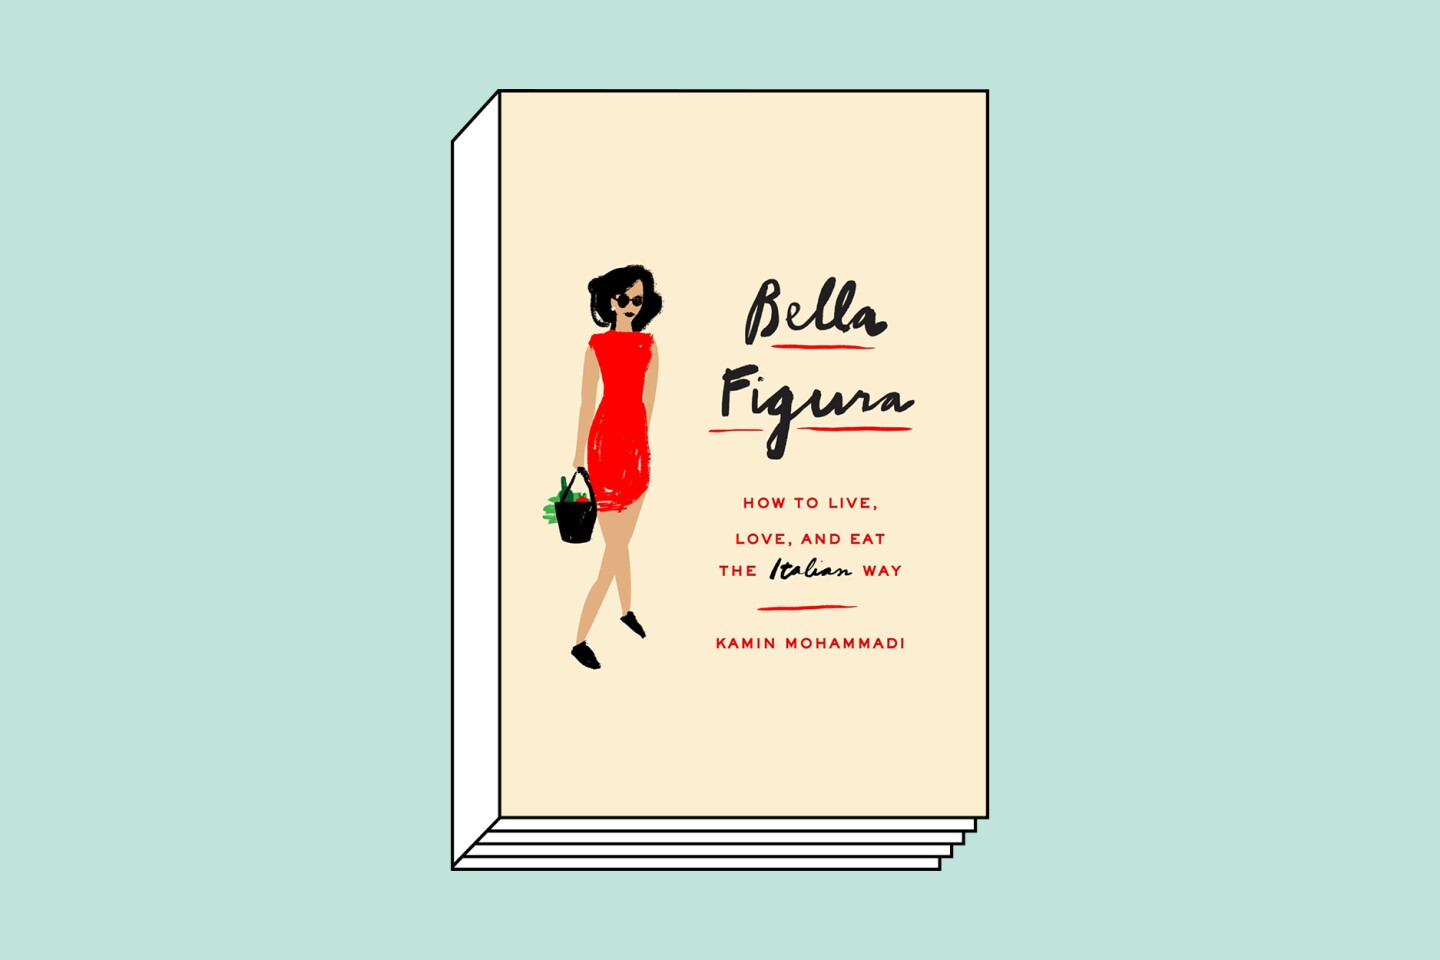 <h2>“Bella Figura: How to Live, Love, and Eat the Italian Way” by Kamin Mohammadi (2018)</h2> <ul>   <li><b>Buy now</b>: <a class="Link" href="https://bookshop.org/p/books/bella-figura-how-to-live-love-and-eat-the-italian-way-kamin-mohammadi/8632794?ean=9780804173292" rel="noopener nofollow sponsored">bookshop.org</a></li>  </ul> <p>Ten years ago, Kamin Mohammadi was laid off her job as an editor in <a class="Link" href="https://www.afar.com/travel-guides/united-kingdom/london/guide" rel="noopener">London</a>. A friend offered her use of an apartment in Florence, and so she went to Tuscany. <i>Bella Figura </i>takes readers along for that first year of Italian living, in which Mohammadi learns the value in living life at a slower pace. The story is intimate, with stories about falling in love with the place but also heartbreak. Chapters are divided by month and begin with a nice little inventory: In January, the scent of the city is woodsmoke; her new Italian word of the month is <i>salve</i>. At the end of each chapter are recipes.</p> <h2>“Eating My Way Through Italy: Heading Off the Main Roads to Discover the Hidden Treasures of the Italian Table” by Elizabeth Minchilli (2018)</h2> <ul>   <li><b>Buy now</b>: <a class="Link" href="https://bookshop.org/p/books/eating-my-way-through-italy-heading-off-the-main-roads-to-discover-the-hidden-treasures-of-the-italian-table-elizabeth-minchilli/8524522?ean=9781250133045" rel="noopener nofollow sponsored">bookshop.org</a></li>  </ul> <p>A resident of Italy for 30 years, Elizabeth Minchilli has become an expert on the country’s cuisine. In <i>Eating My Way Through Italy</i>, she provides the tools for readers to get off the beaten path, as the book’s subtitle suggests. Divided geographically, written conversationally, and even including tips for where to stay, Minchilli’s book reminds readers how distinct—and delicious—Italy’s regional cuisines are.</p>  <h2>“Memoirs of Hadrian” by Marguerite Yourcenar (1951)</h2> <ul>   <li><b>Buy now</b>: <a class="Link" href="https://bookshop.org/p/books/memoirs-of-hadrian-marguerite-yourcenar/10393155?ean=9780374529260" rel="noopener nofollow sponsored">bookshop.org</a></li>  </ul> <p>This absorbing historical novel is an “autobiographical letter” written by Emperor Hadrian to his successor, Marcus Aurelius, as Hadrian recalls his life and his love for handsome young Antinous. If all you know about this emperor of ancient Rome is Hadrian’s Wall (begun in 122 C.E. after Hadrian visited Britain), you will want to learn more about him and his era. </p>